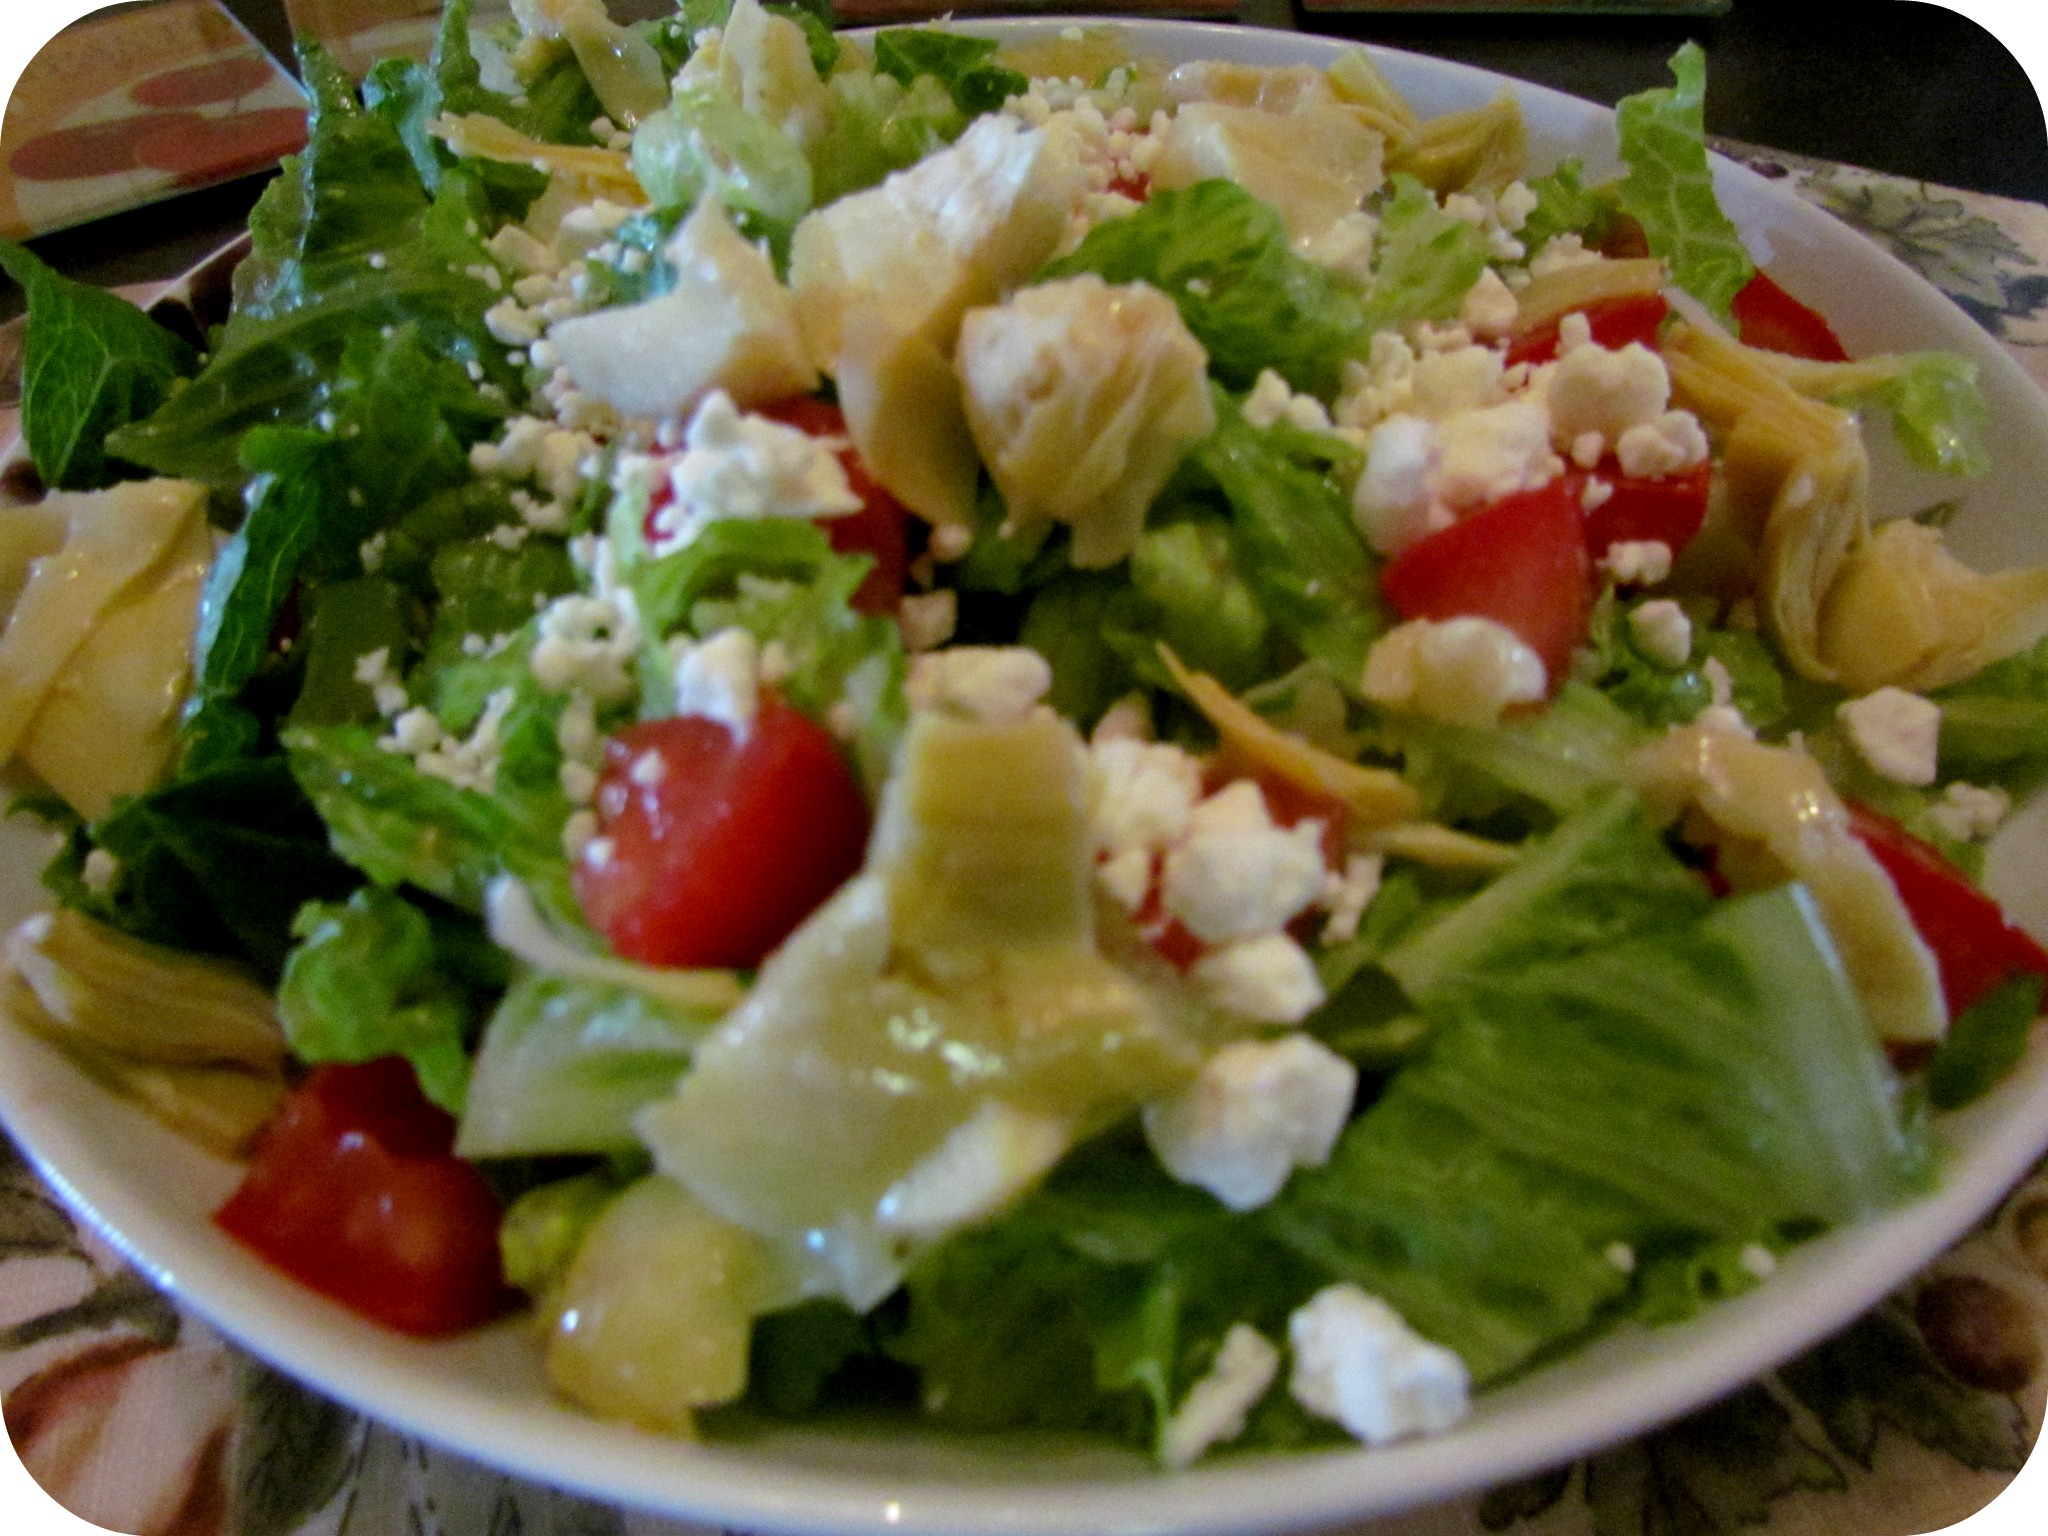 Spicing Up Your Salads: Romaine & Artichoke Salad with Avocado Dressing + Baked Goat Cheese & Cranberry Salad